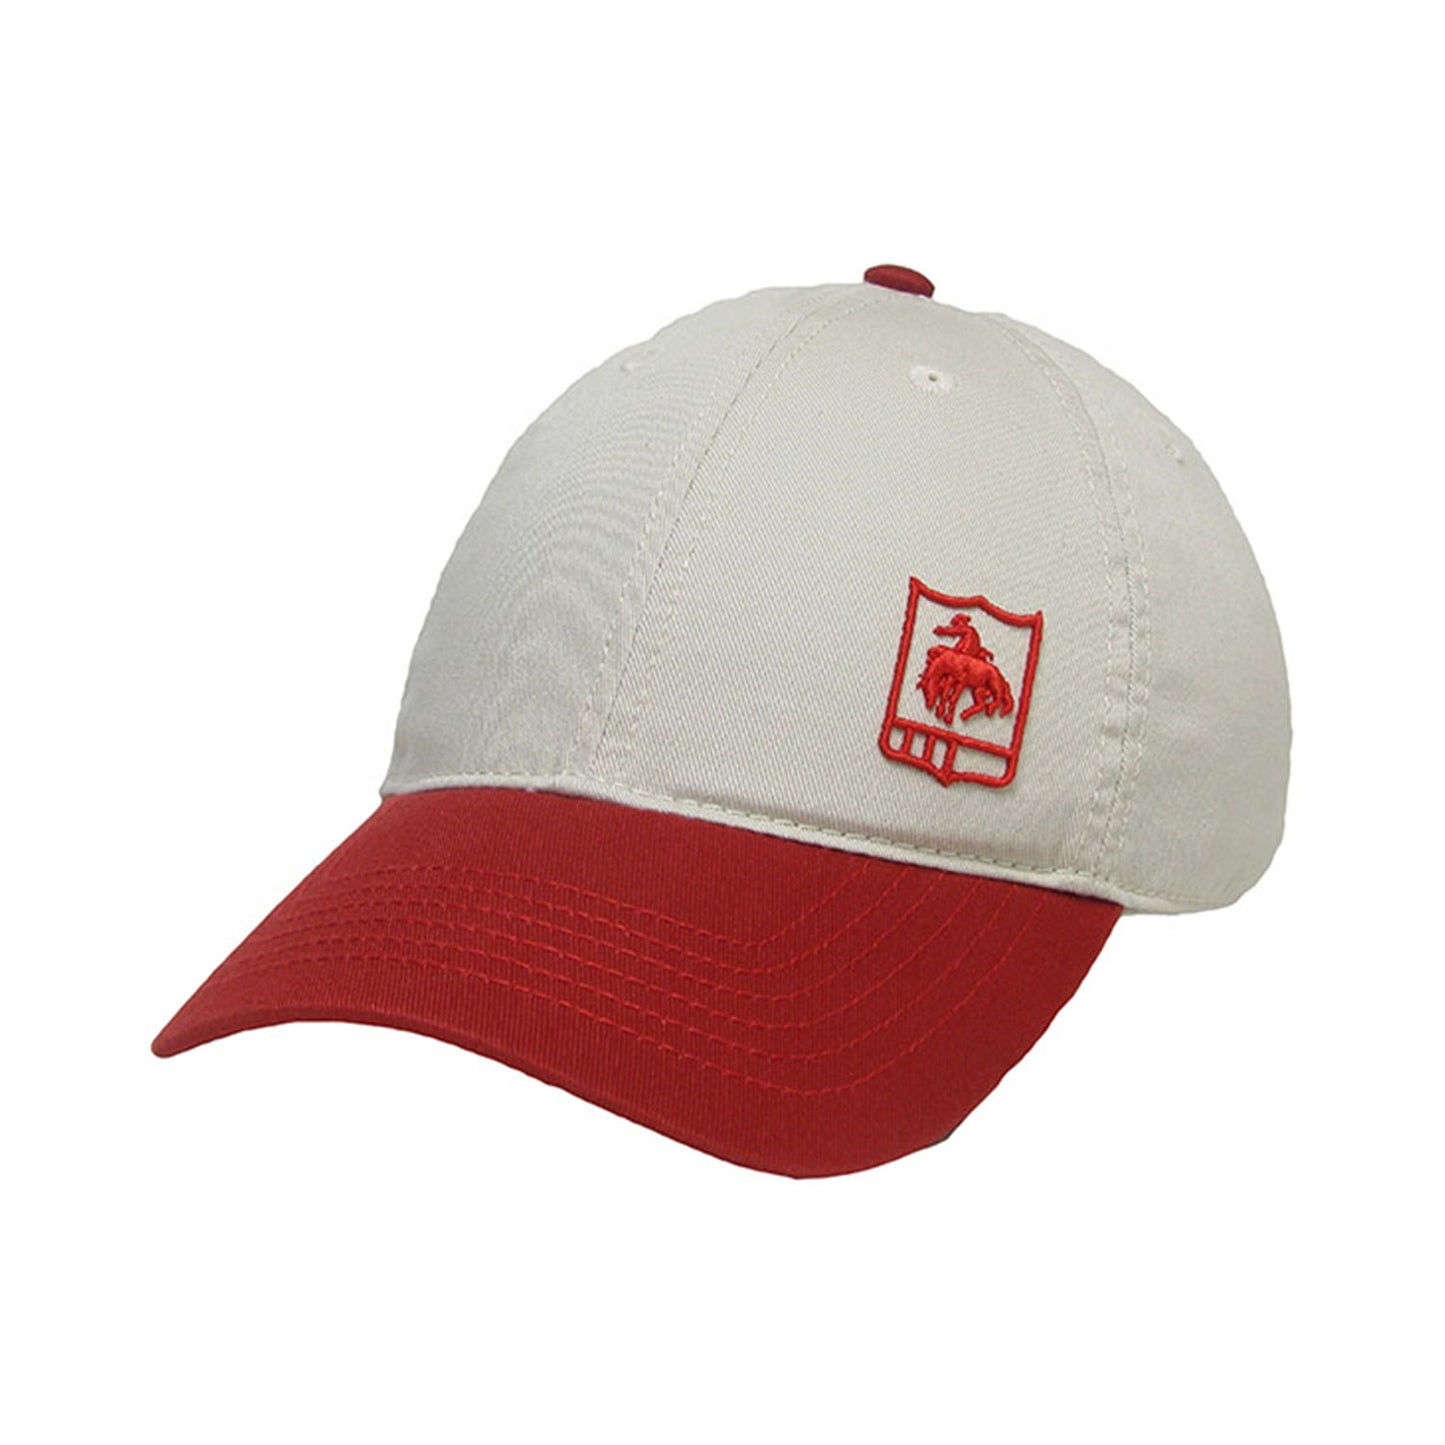 PRORODEO Offset Shield Relaxed Twill Adjustable Hat - Front View